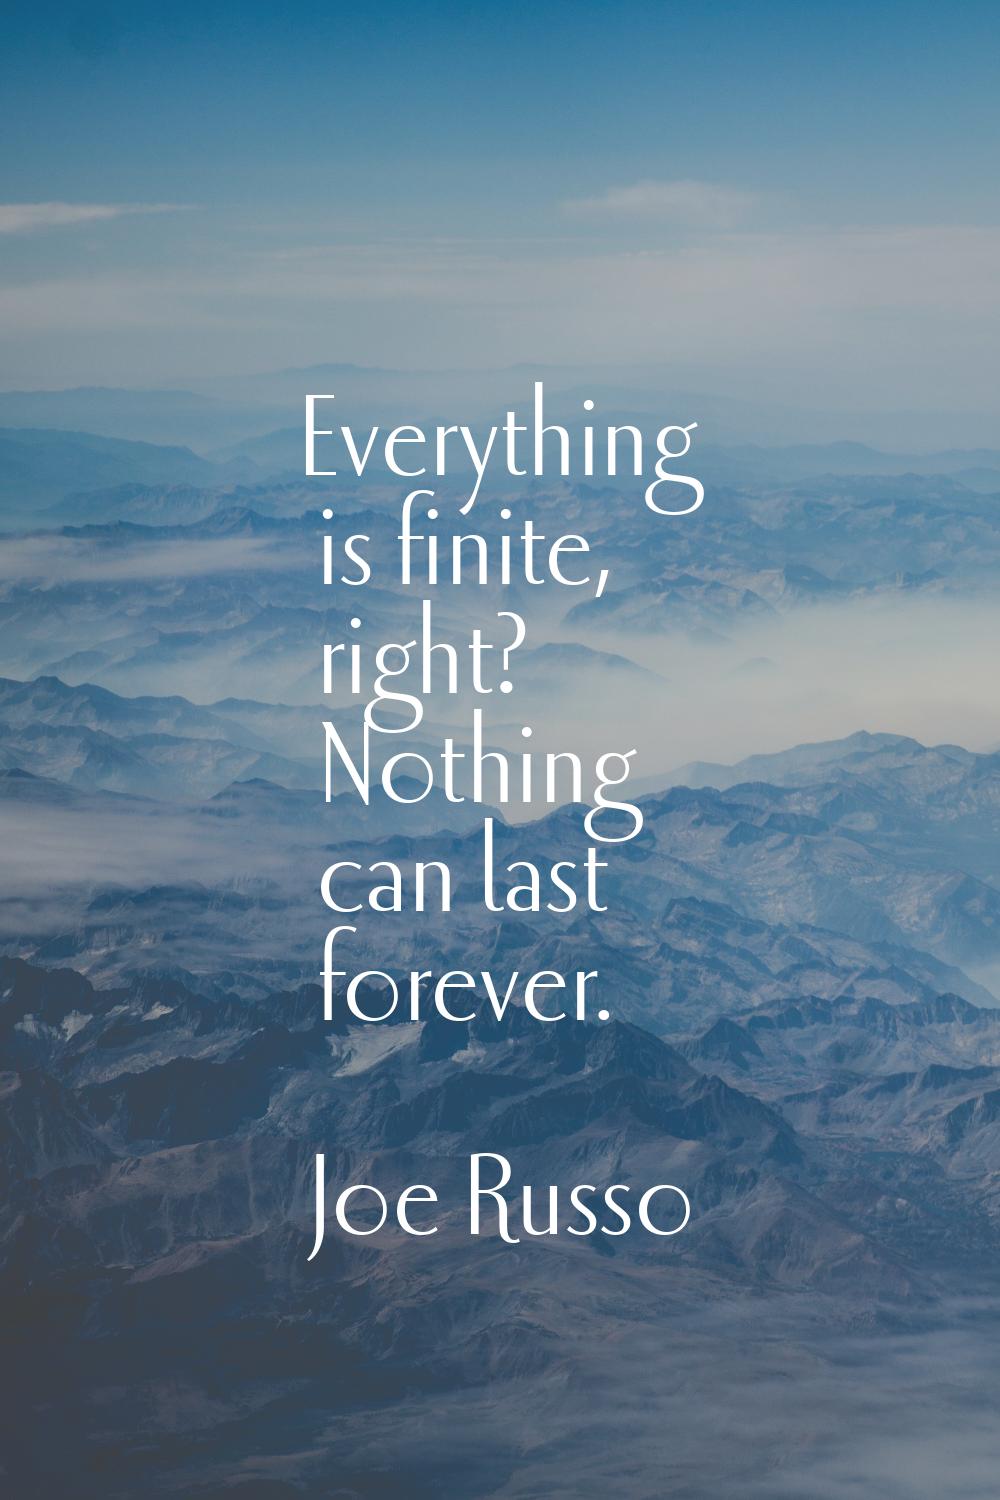 Everything is finite, right? Nothing can last forever.